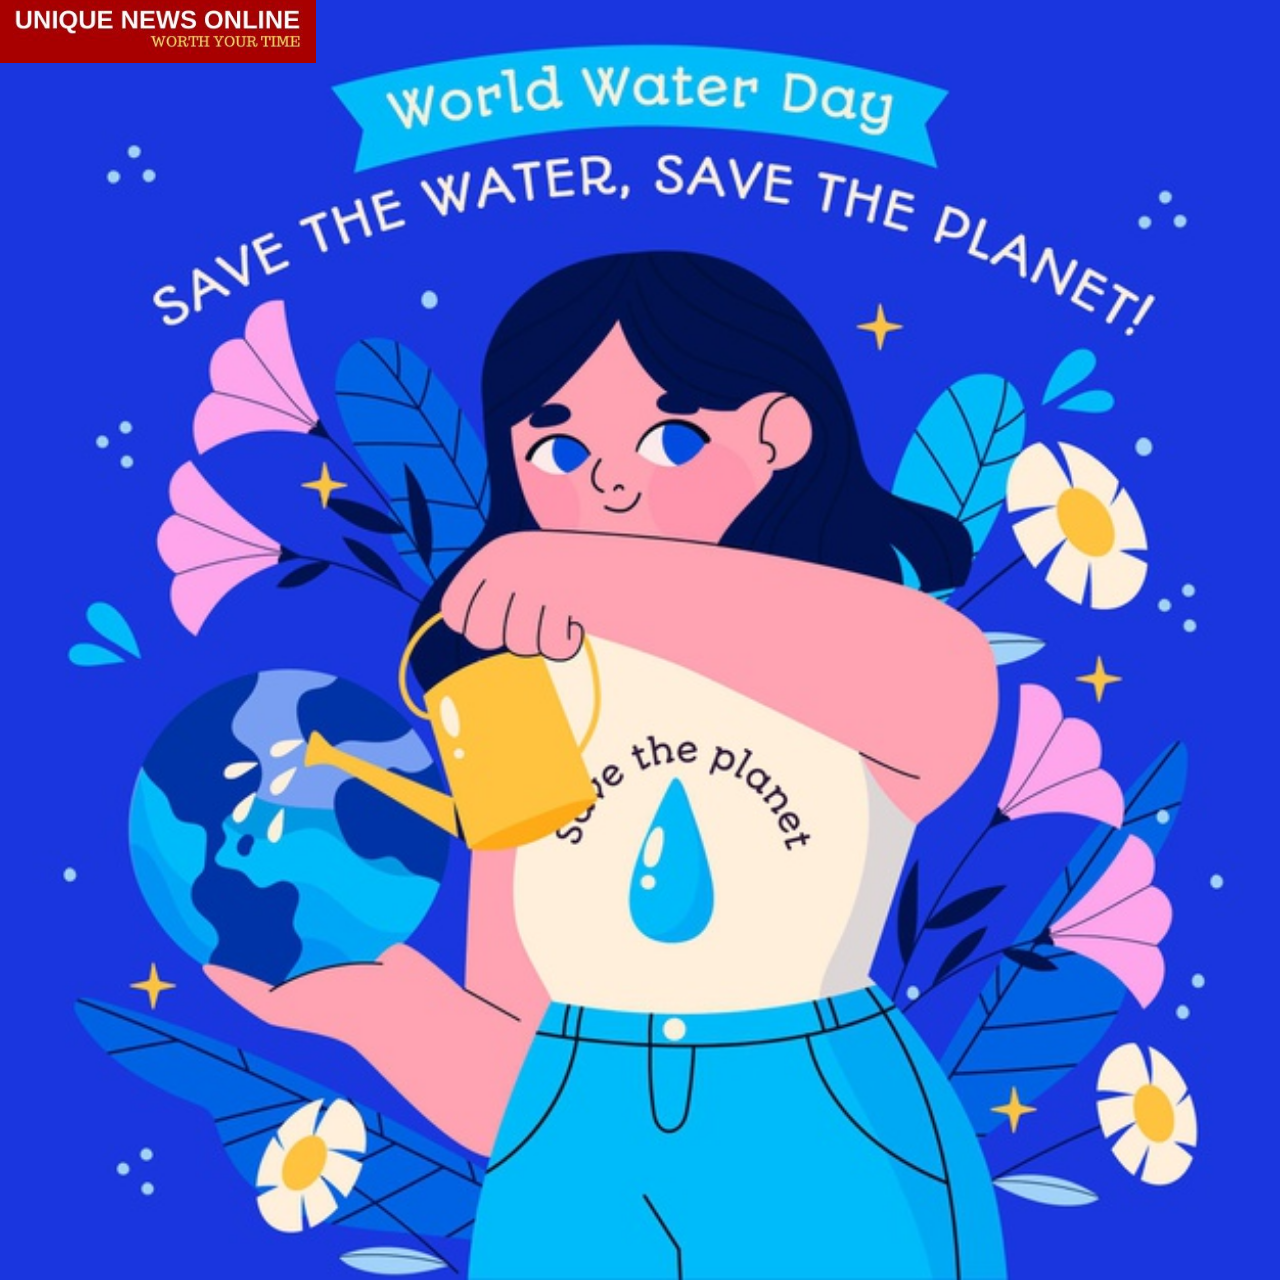 World Water Day 2021 Quotes, Messages Wishes, Greetings, and Images